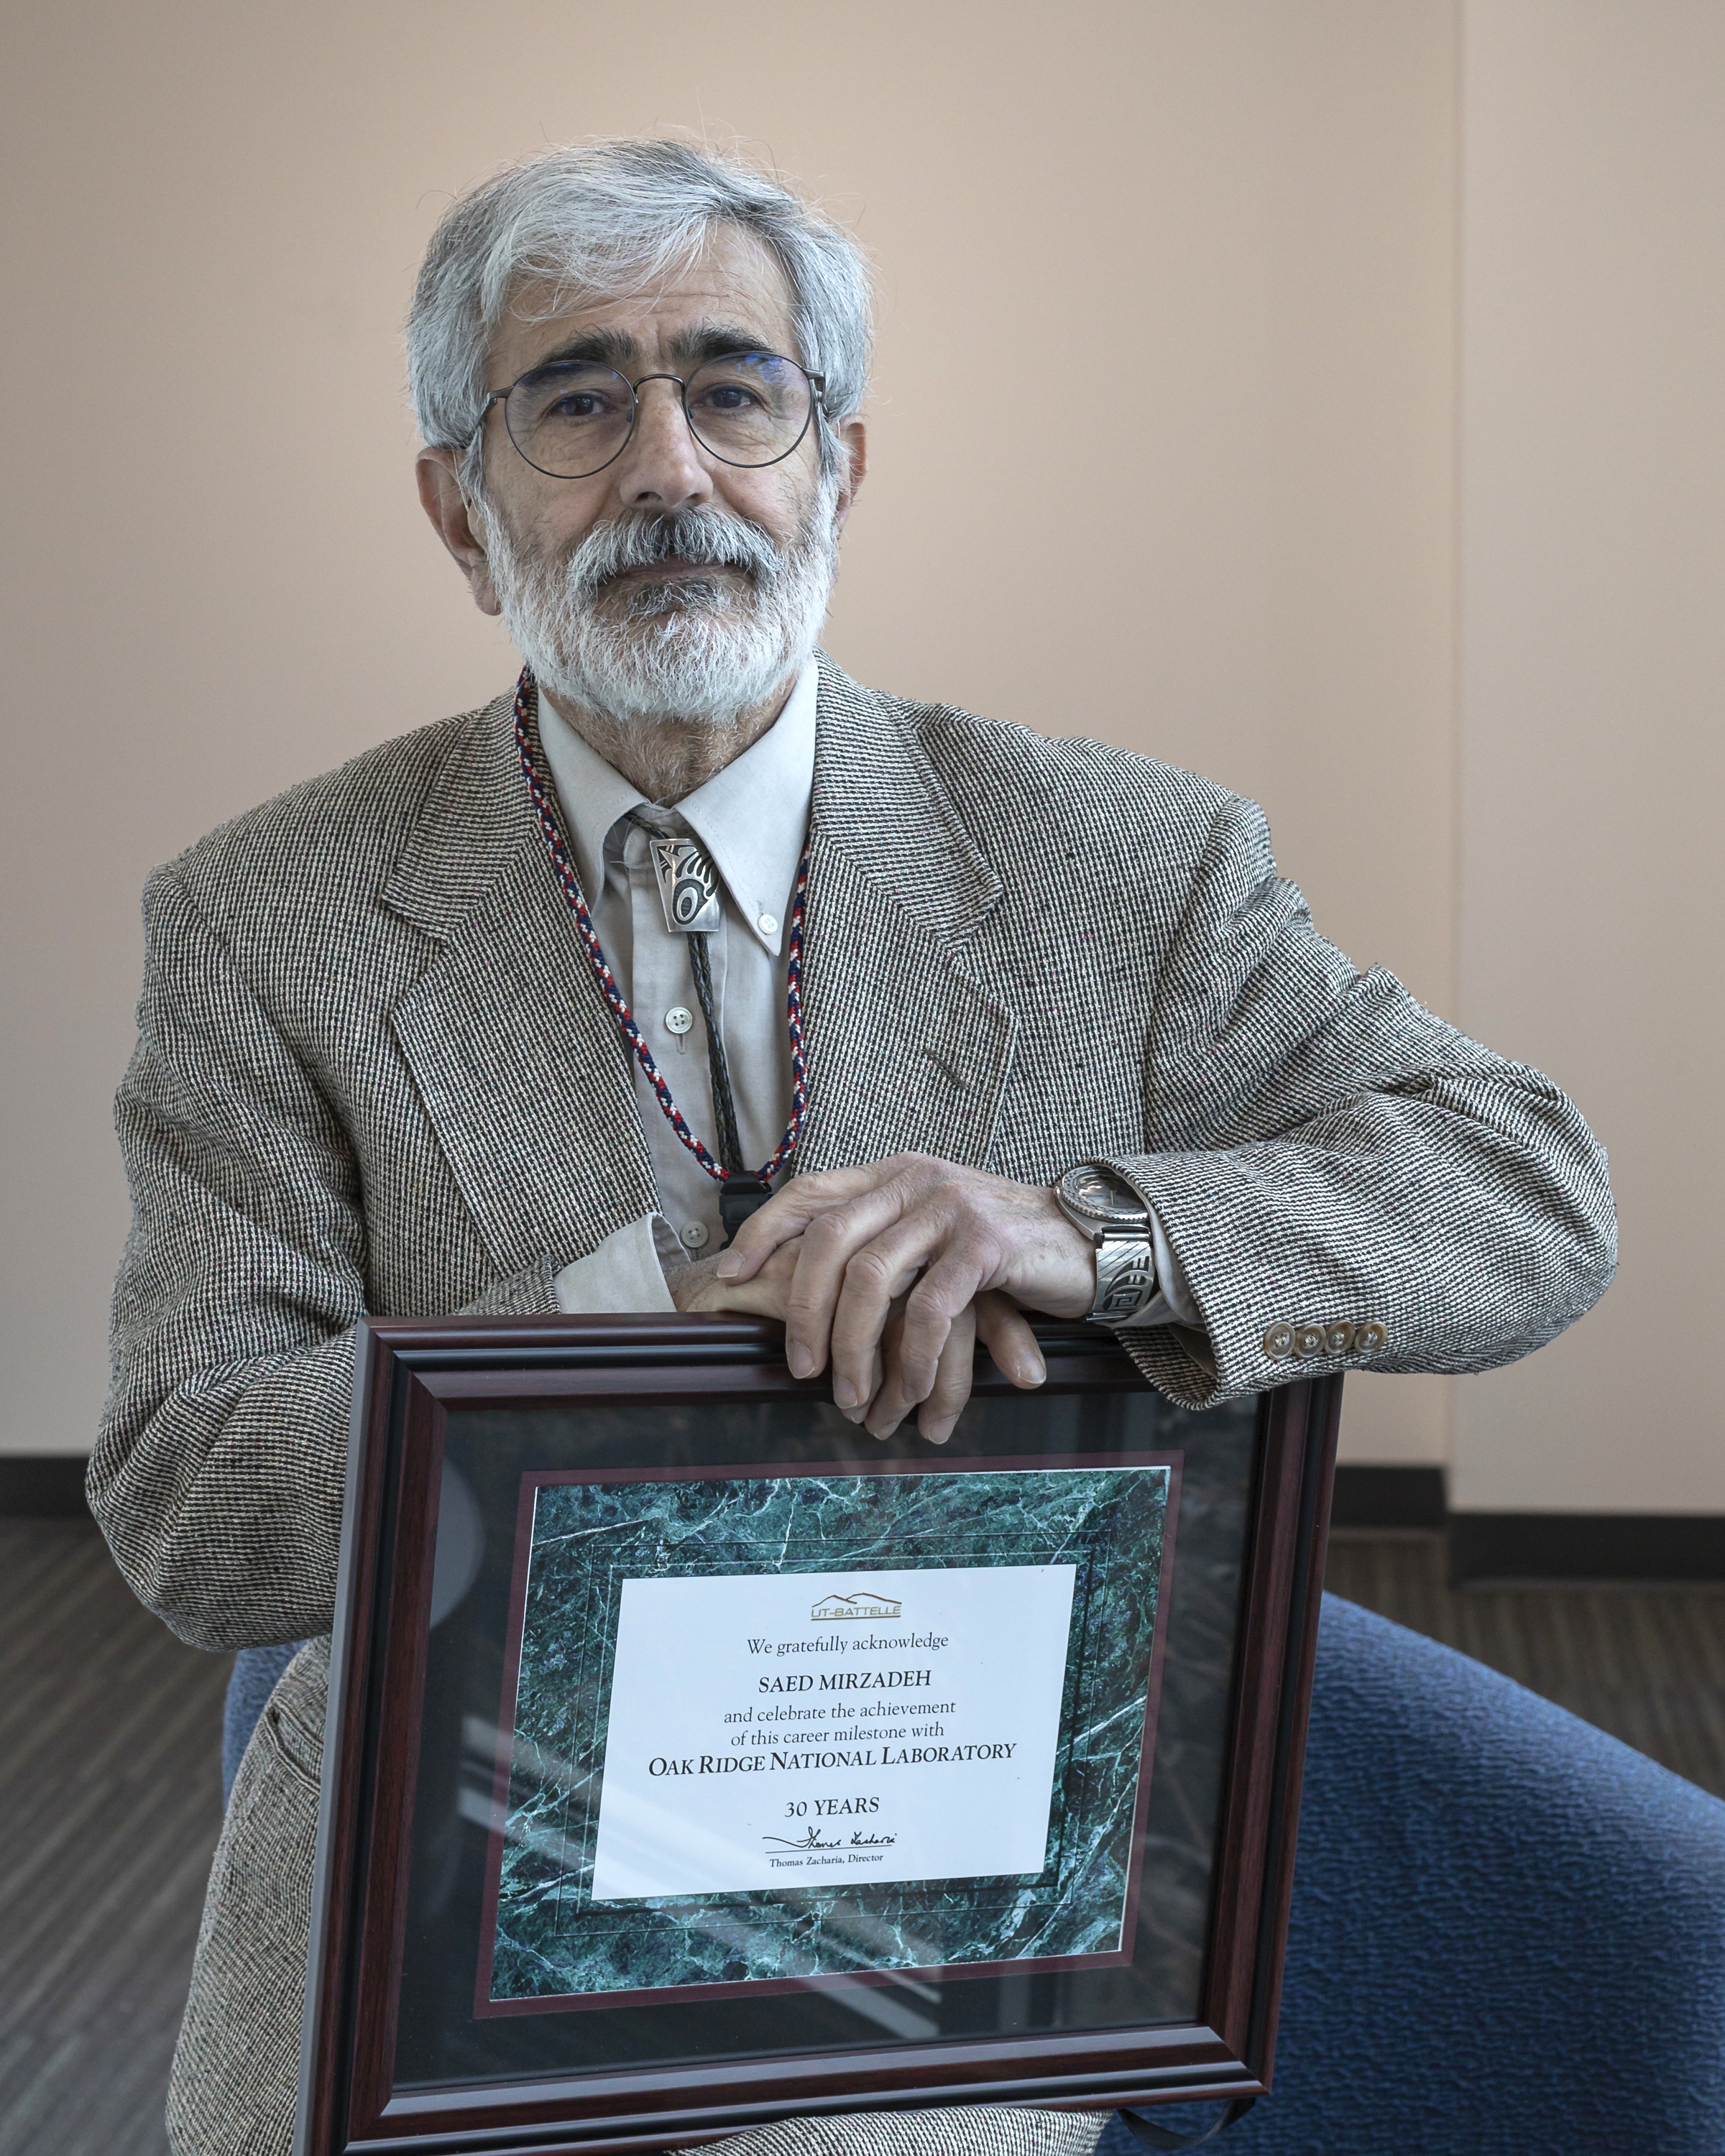 Saed Mirzadeh celebrates 30 years with ORNL